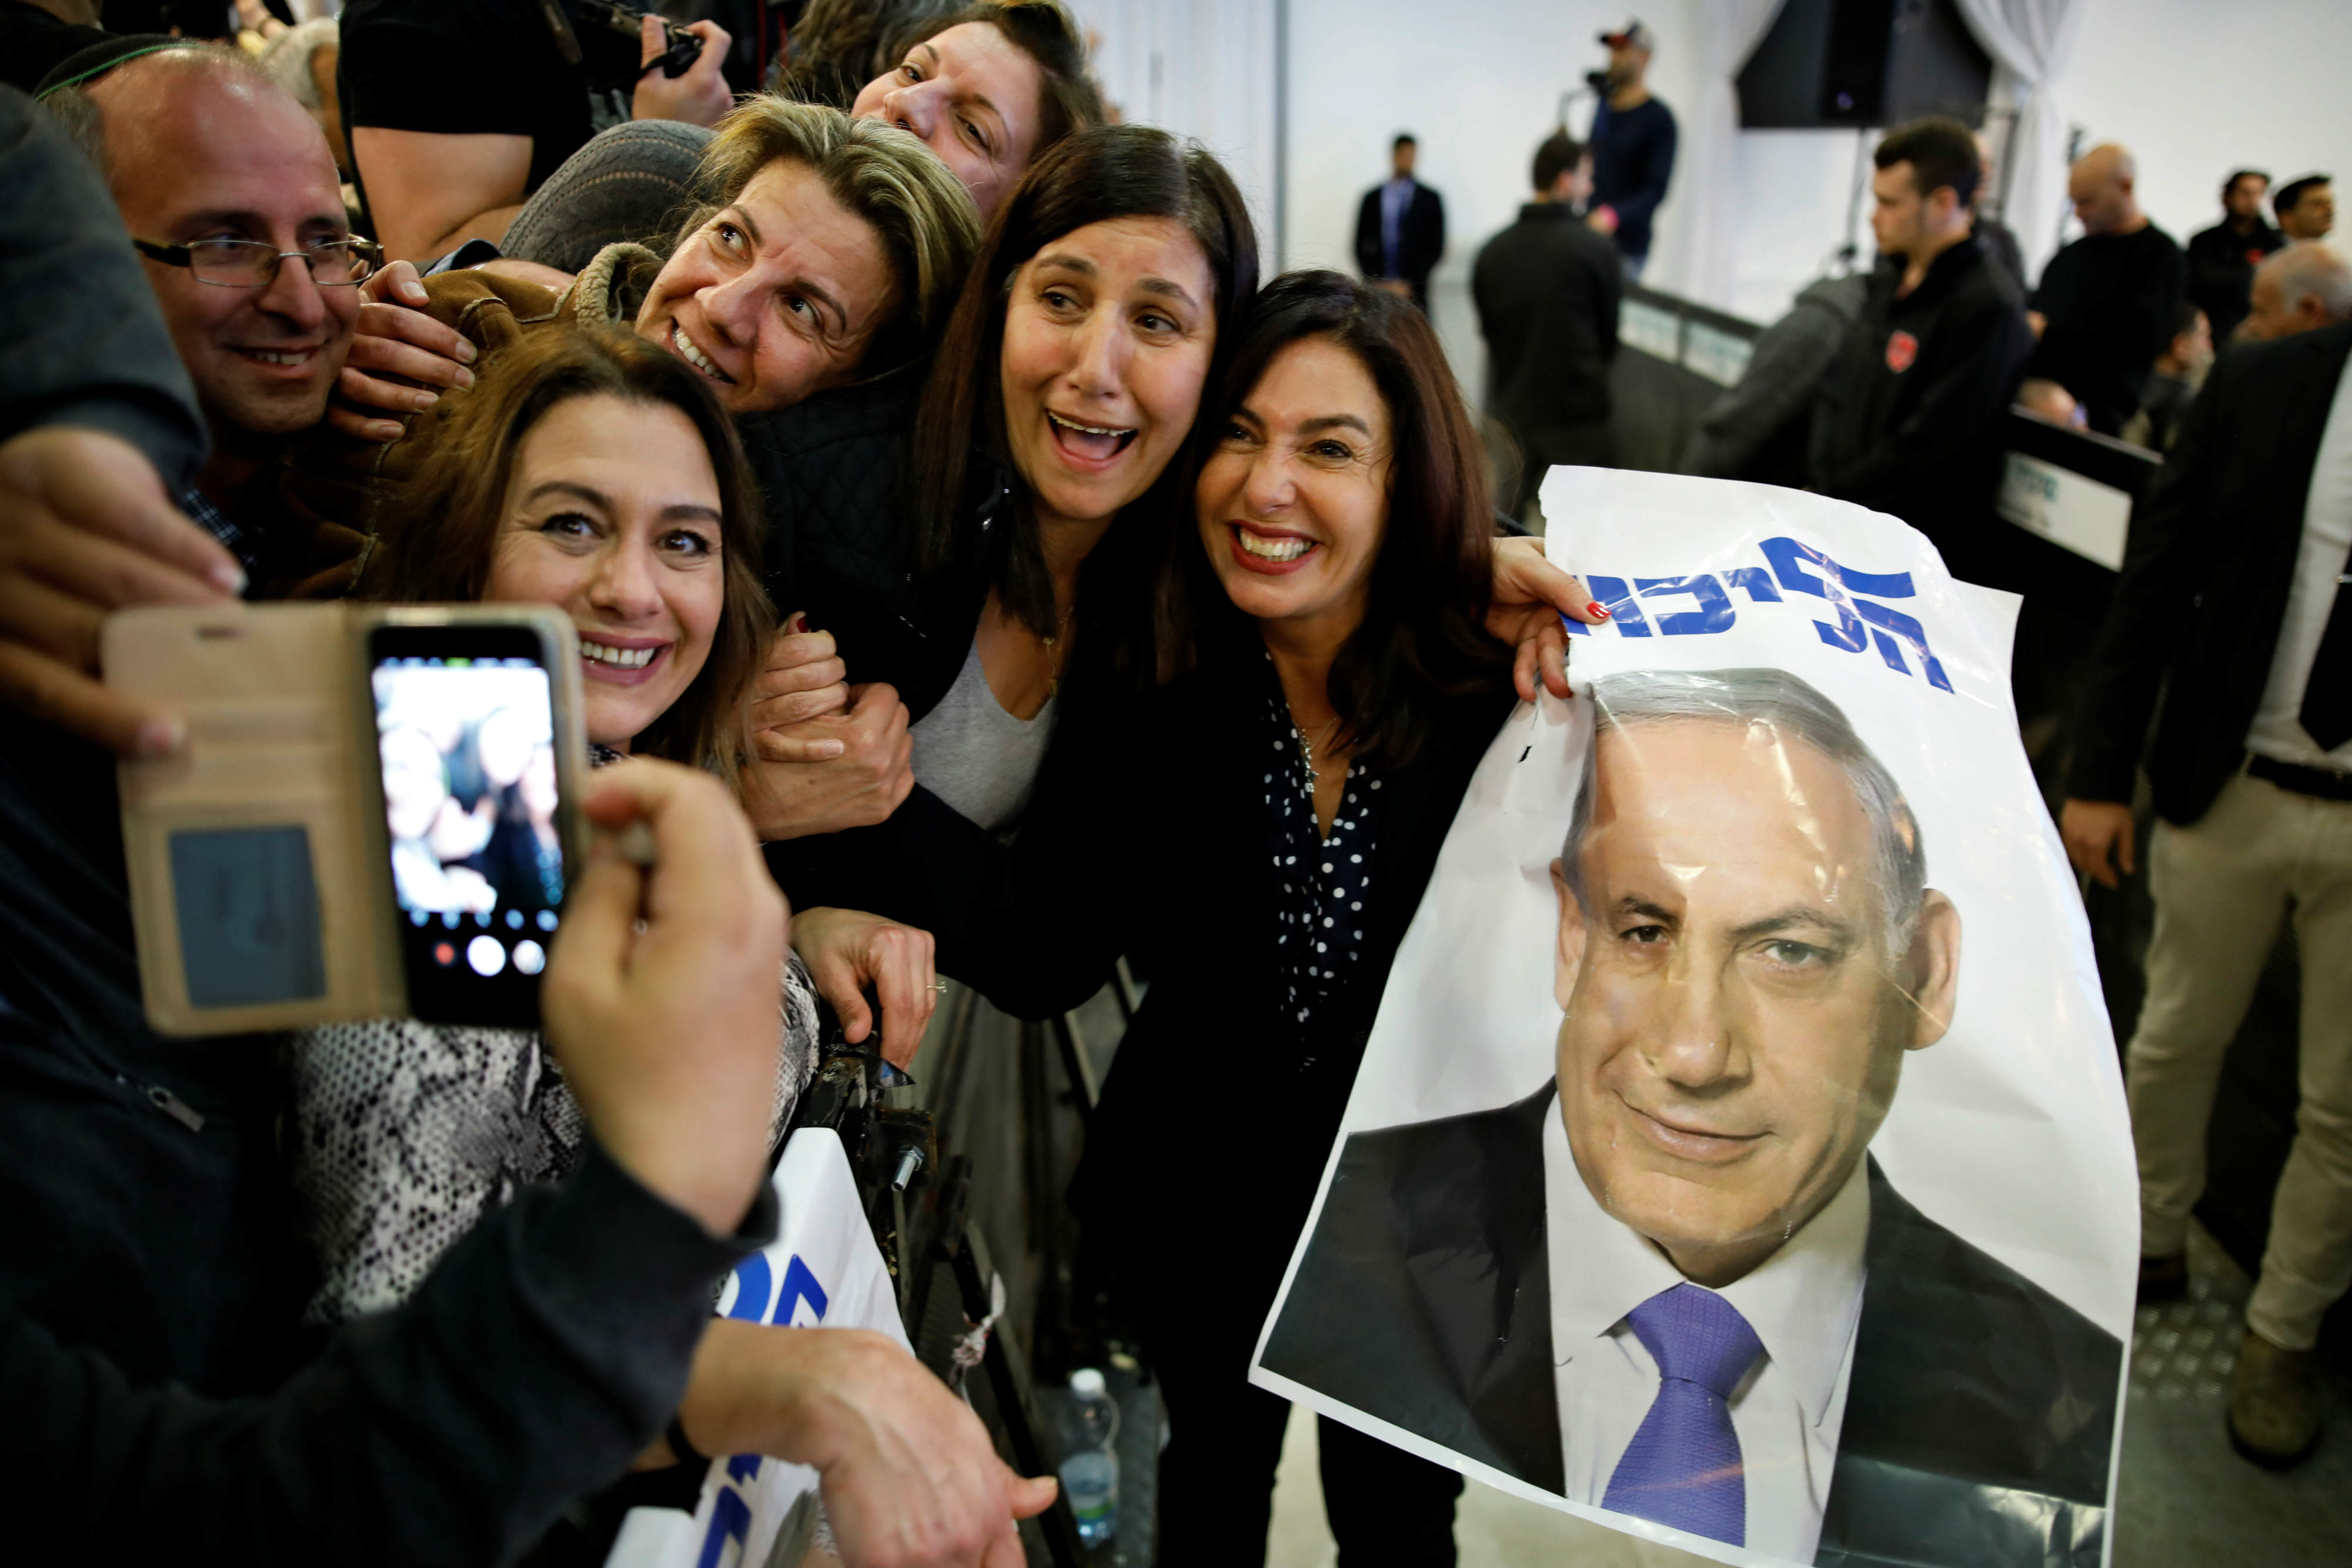 Israel's Minister of Culture and Sport Miri Regev and supporters of the Likud Party hold a photo of Israeli Prime Minister Benjamin Netanyahu at the launch of Likud party's election campaign (Reuters)